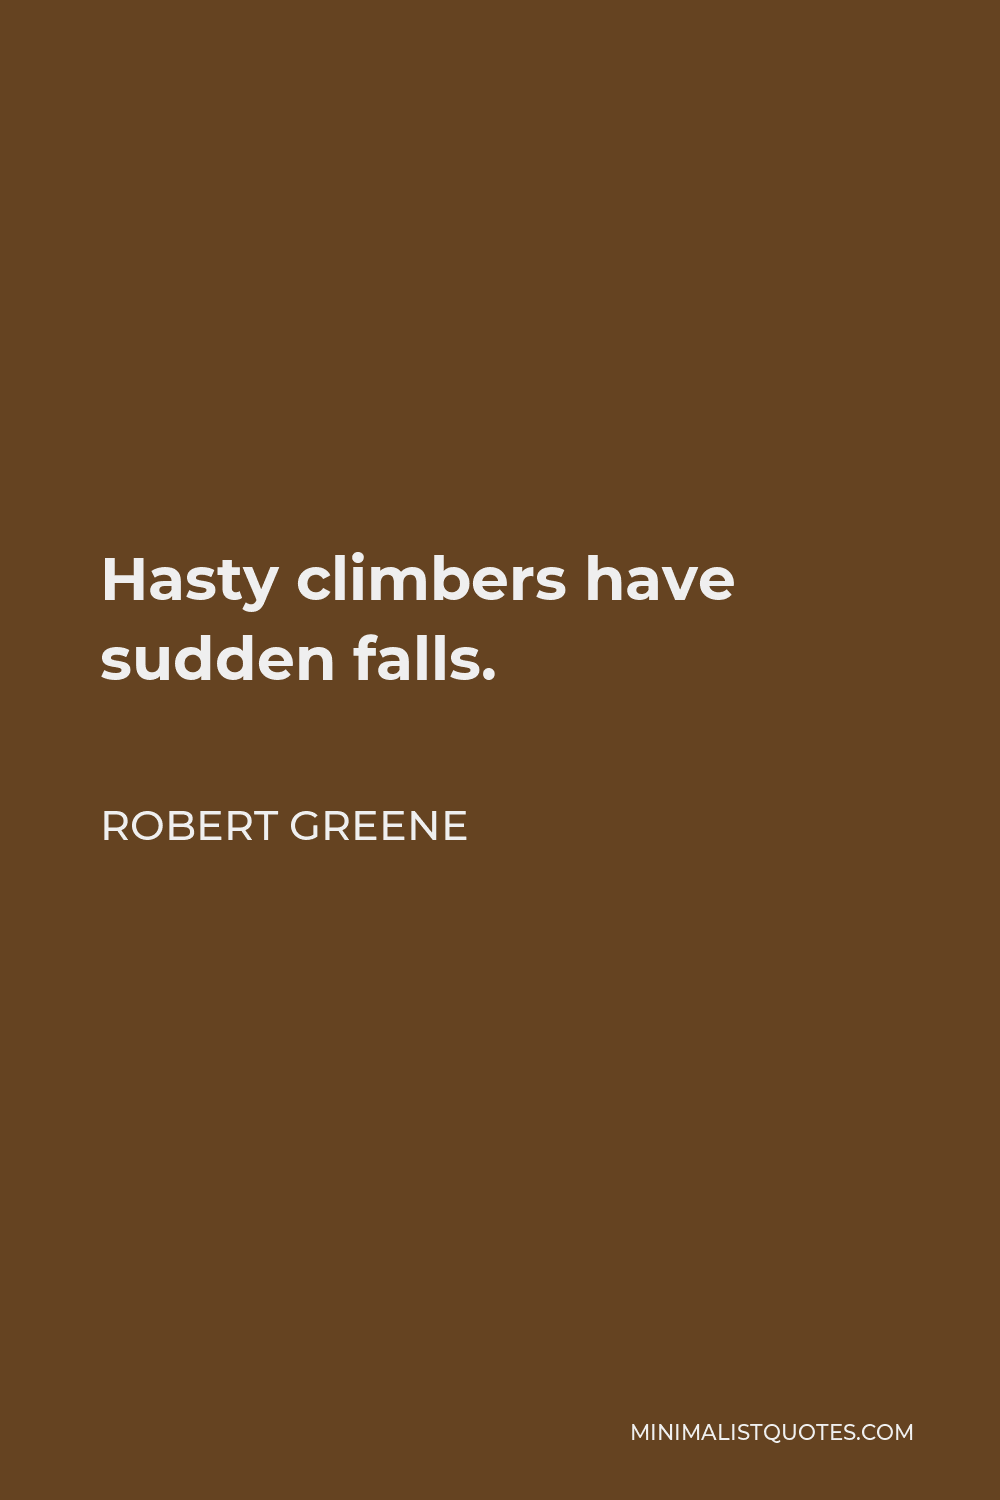 Robert Greene Quote - Hasty climbers have sudden falls.